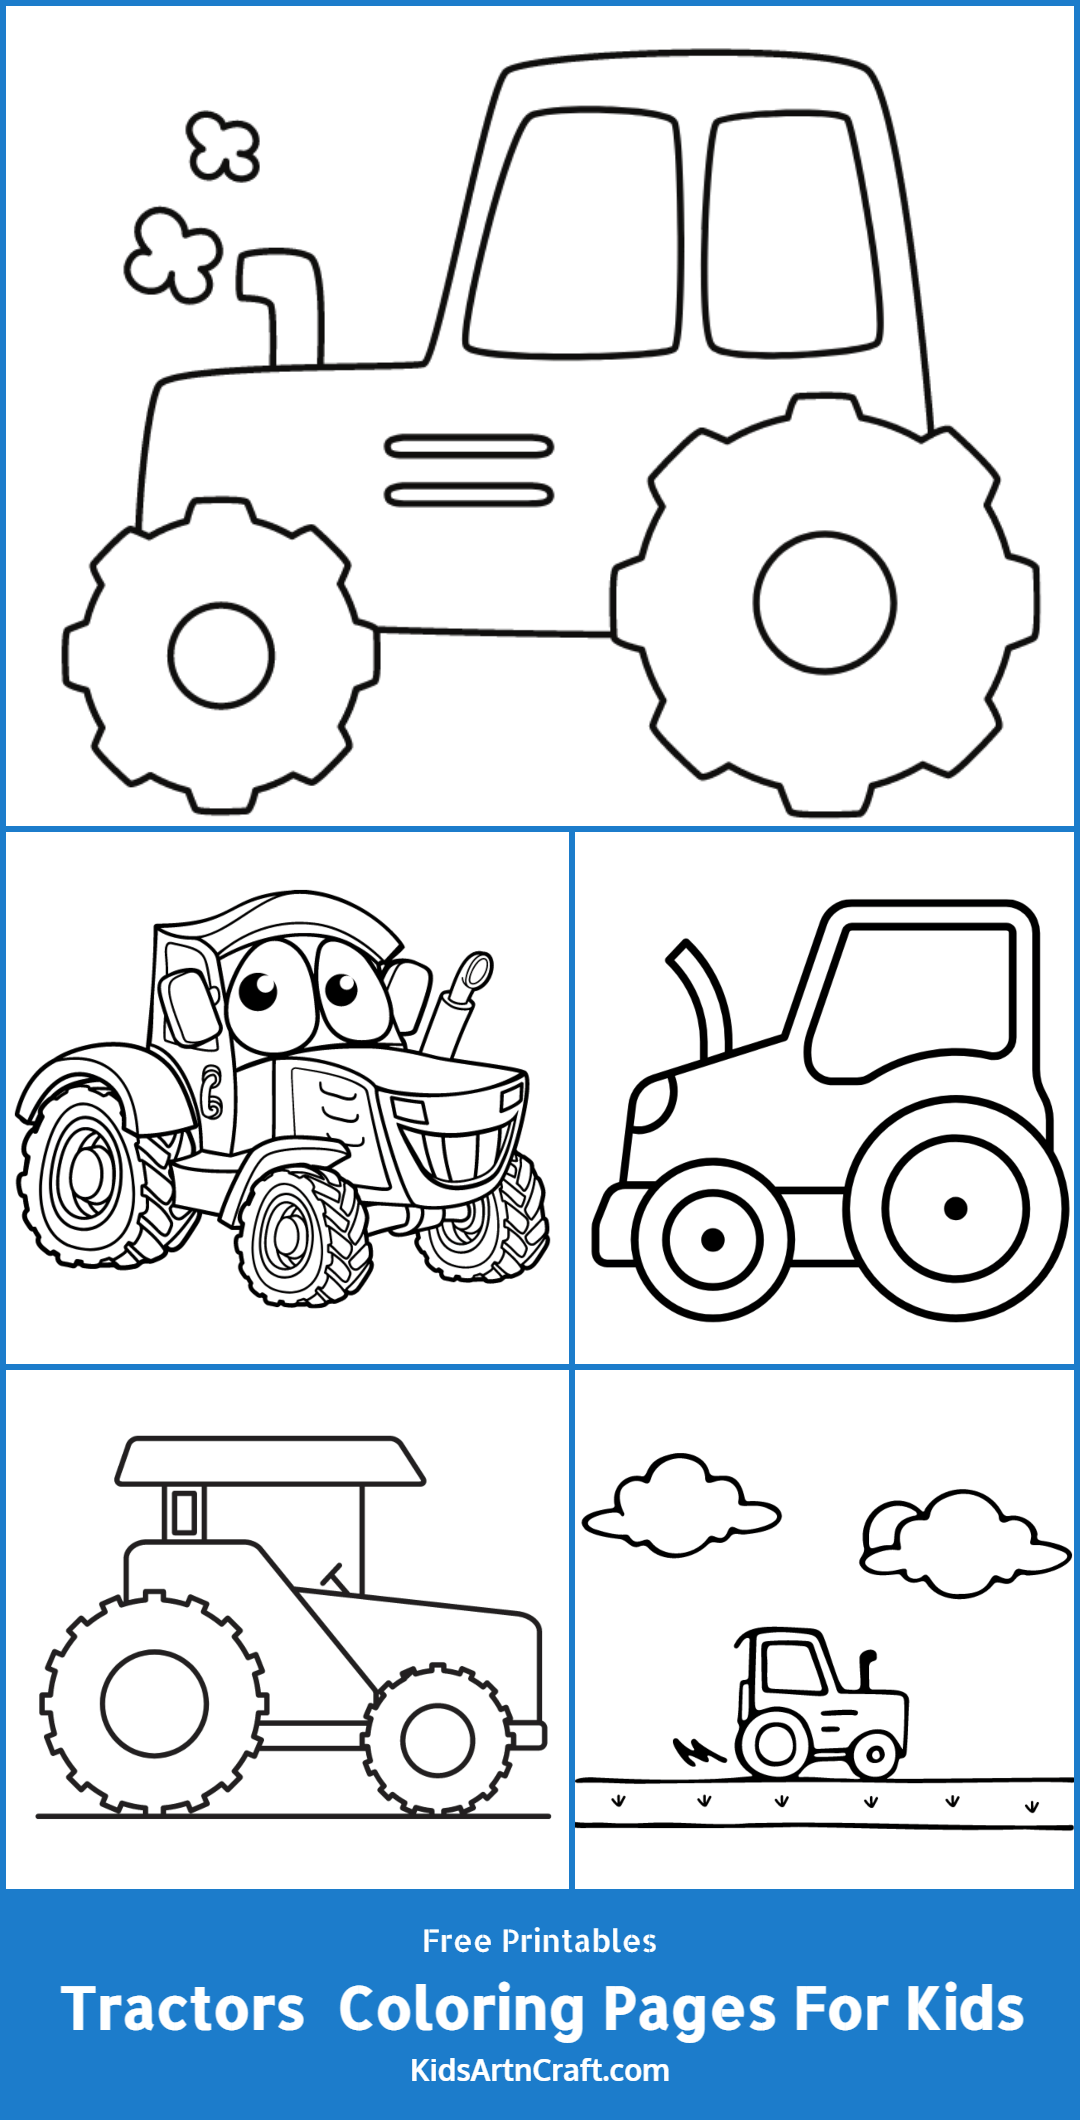 Tractors Coloring Pages For Kids – Free Printables